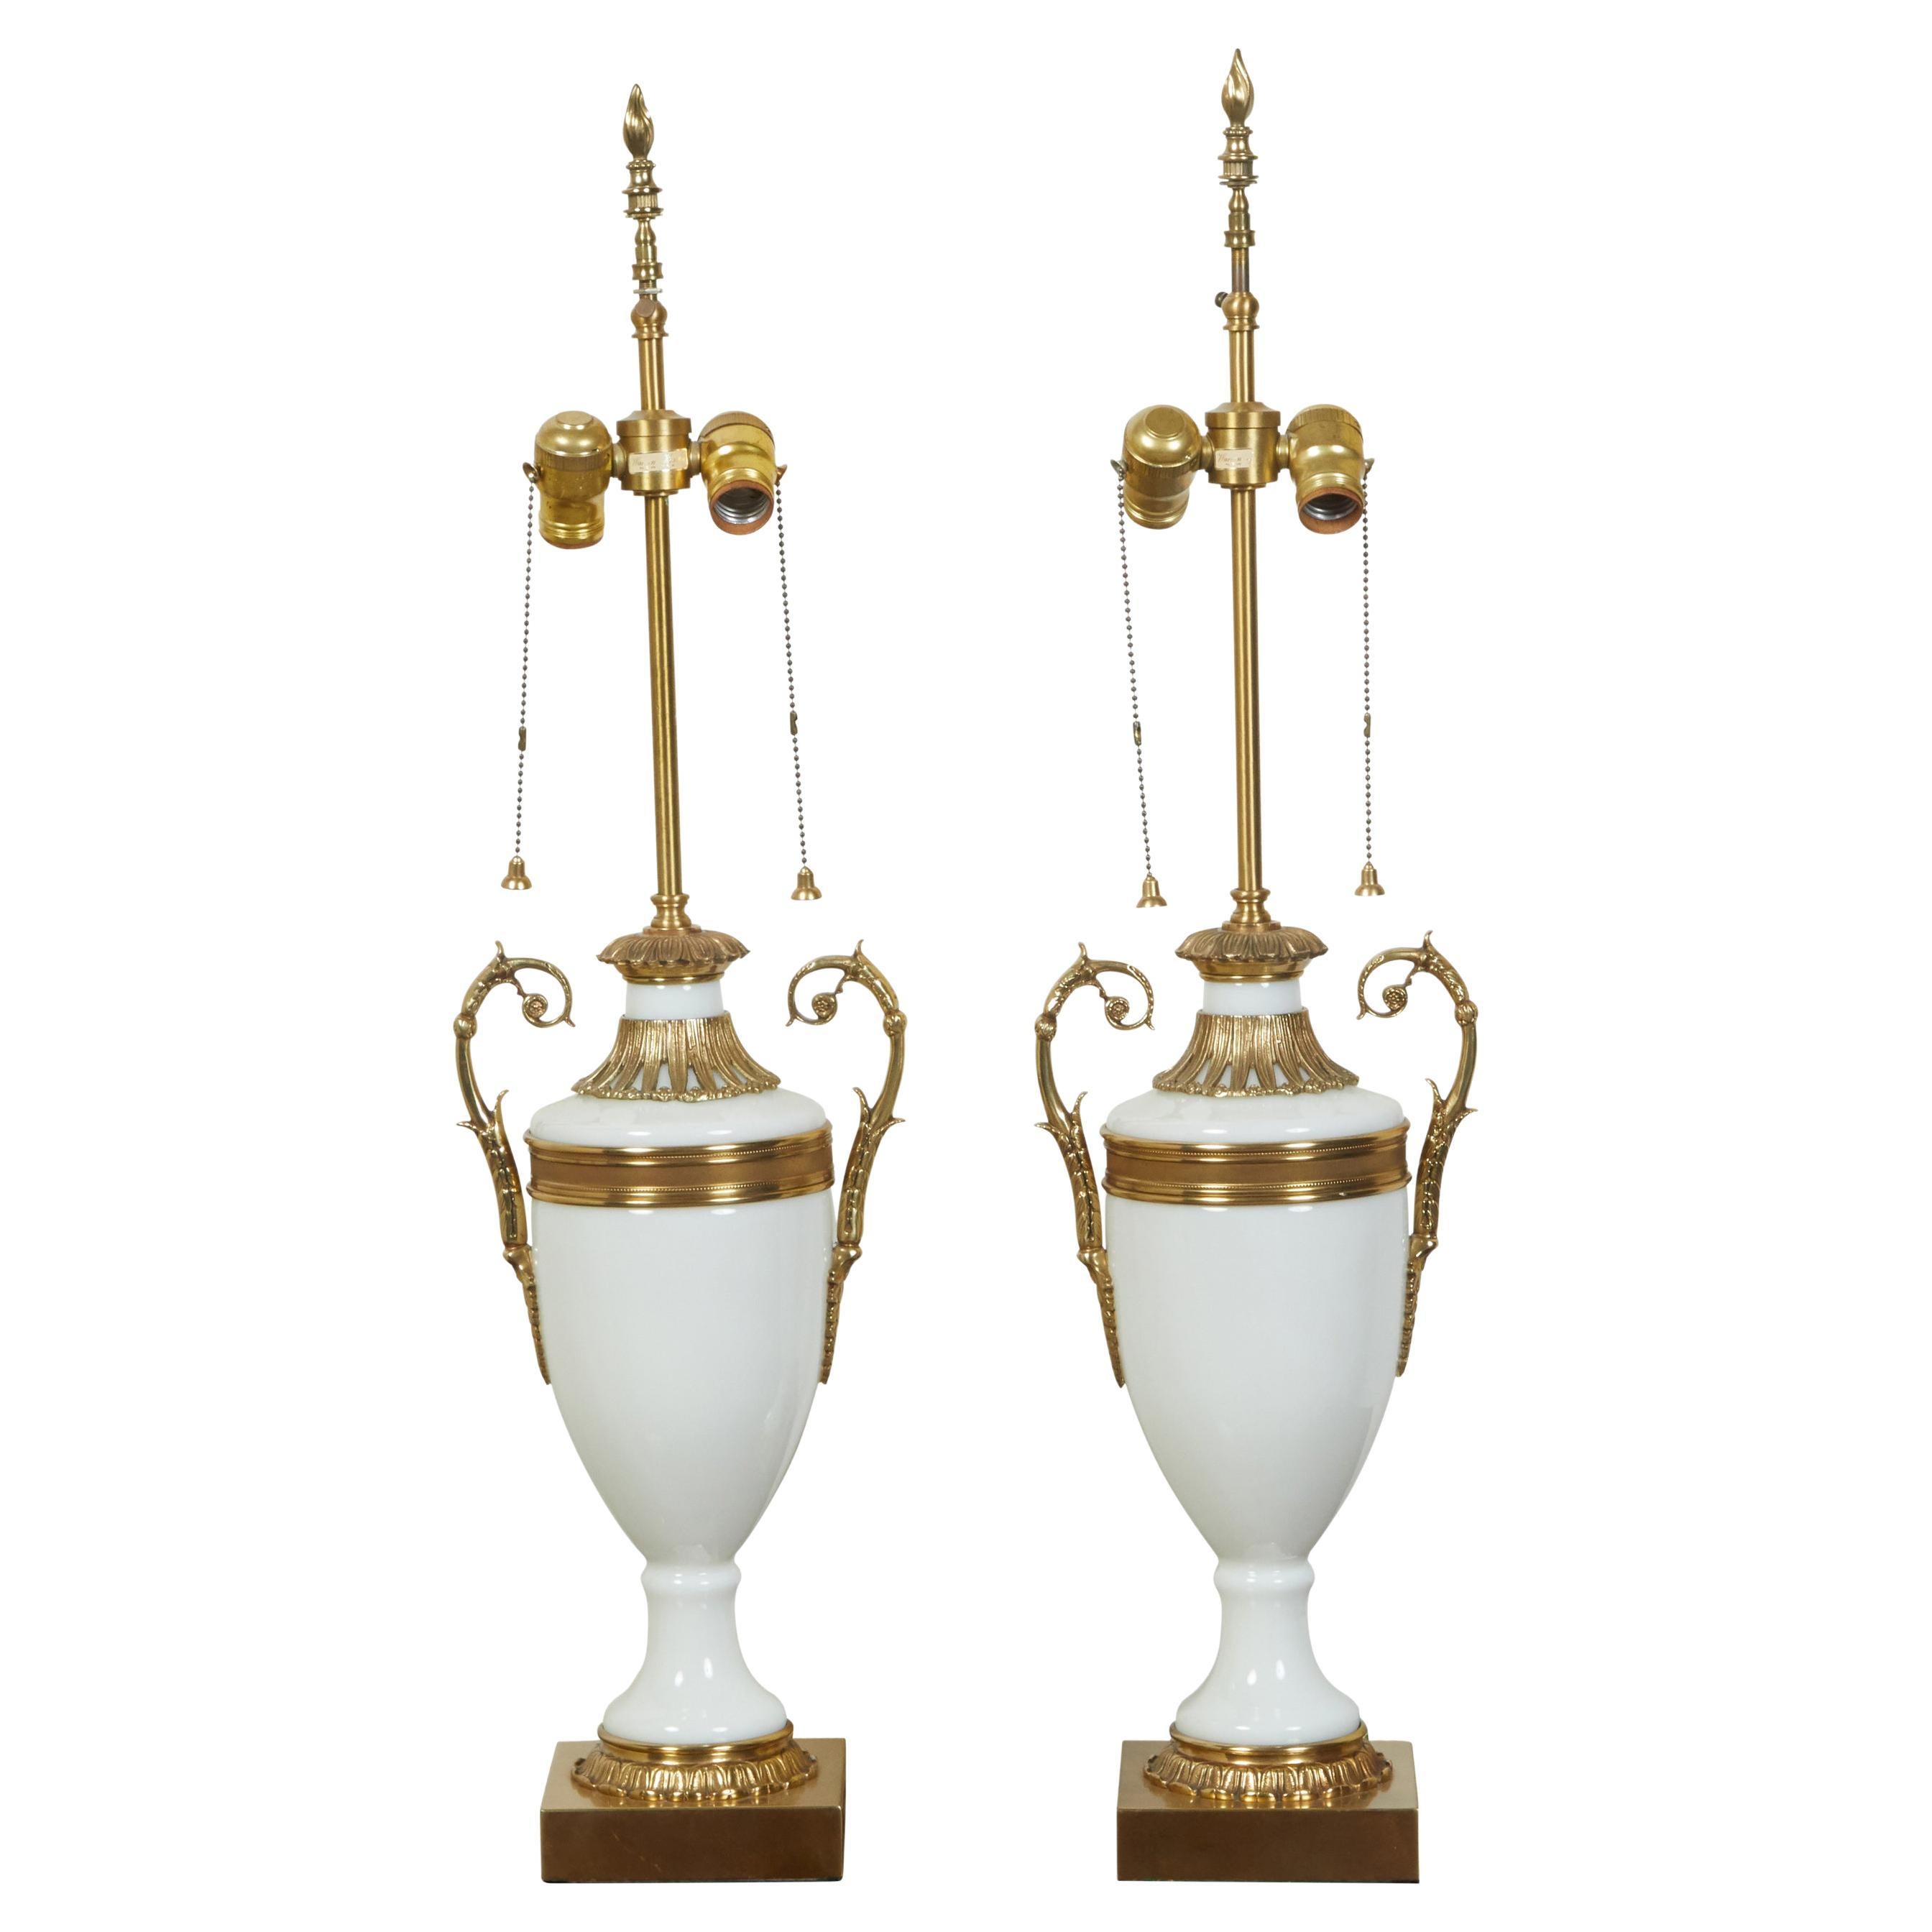 Pair of French Neoclassical Style Opaline Glass Table Lamps with Brass Accents